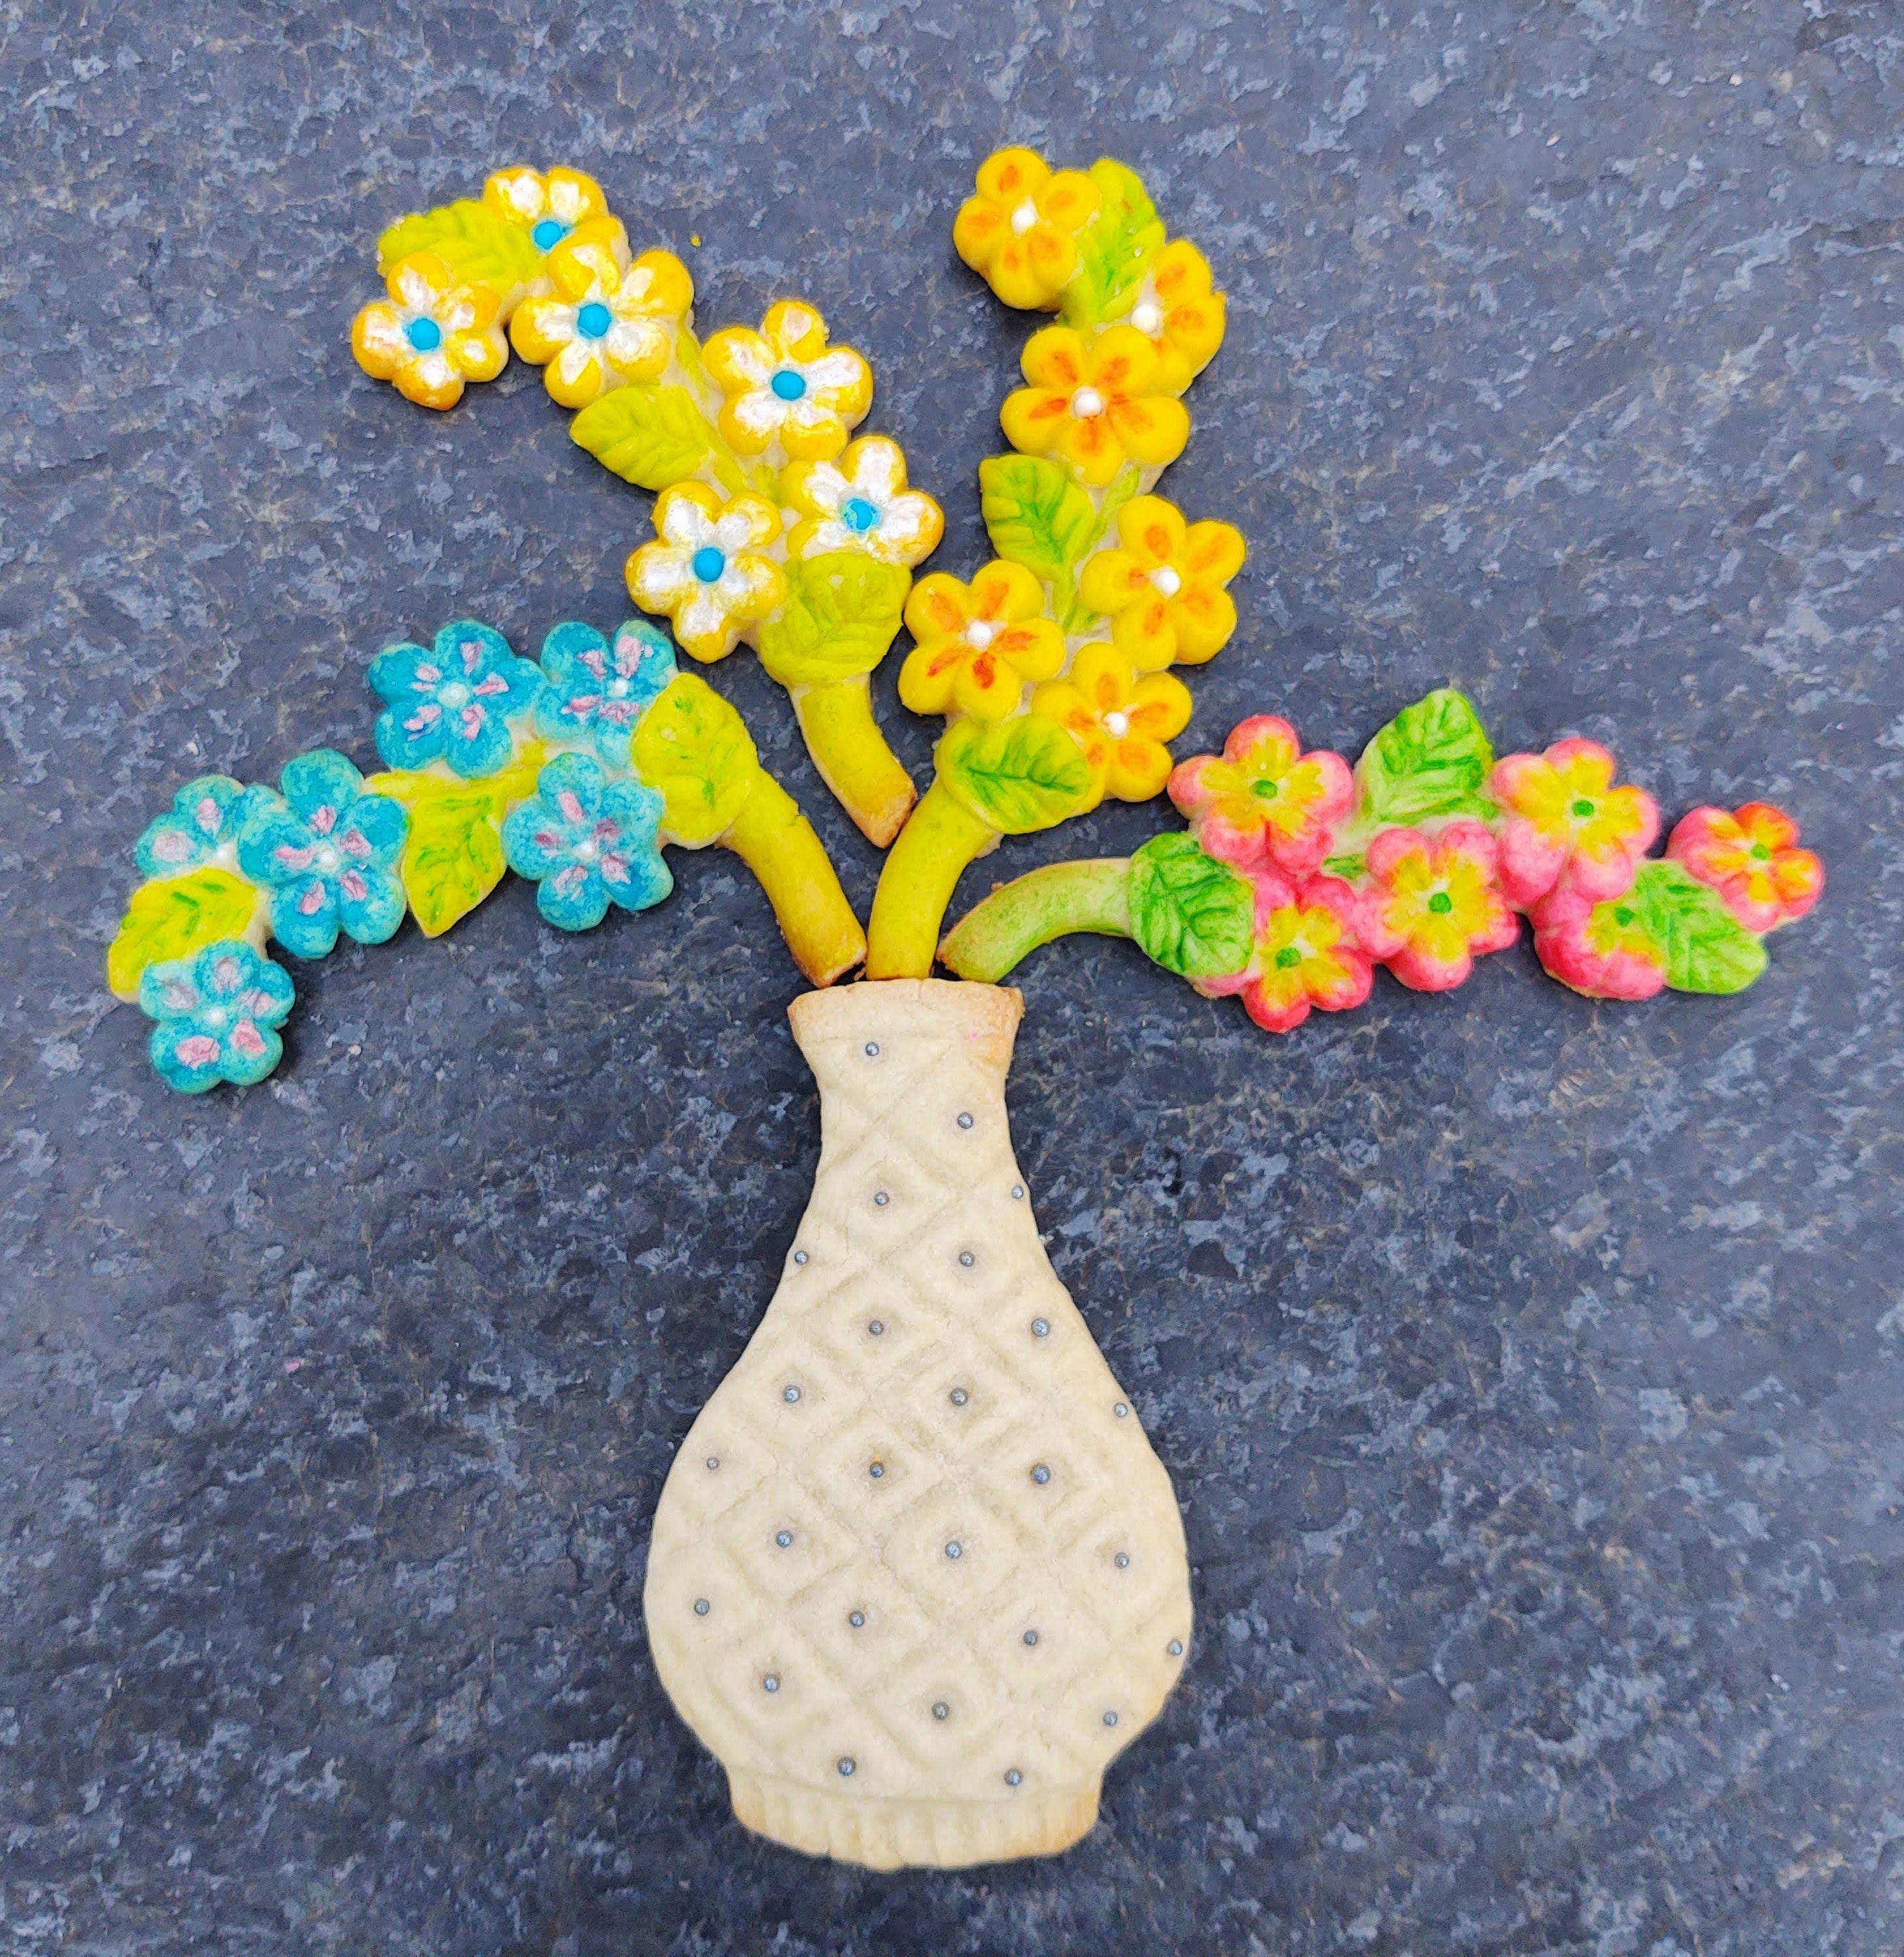 Vase & Flower Bouquet Silicone Cookie Mold Set - SAVE $5